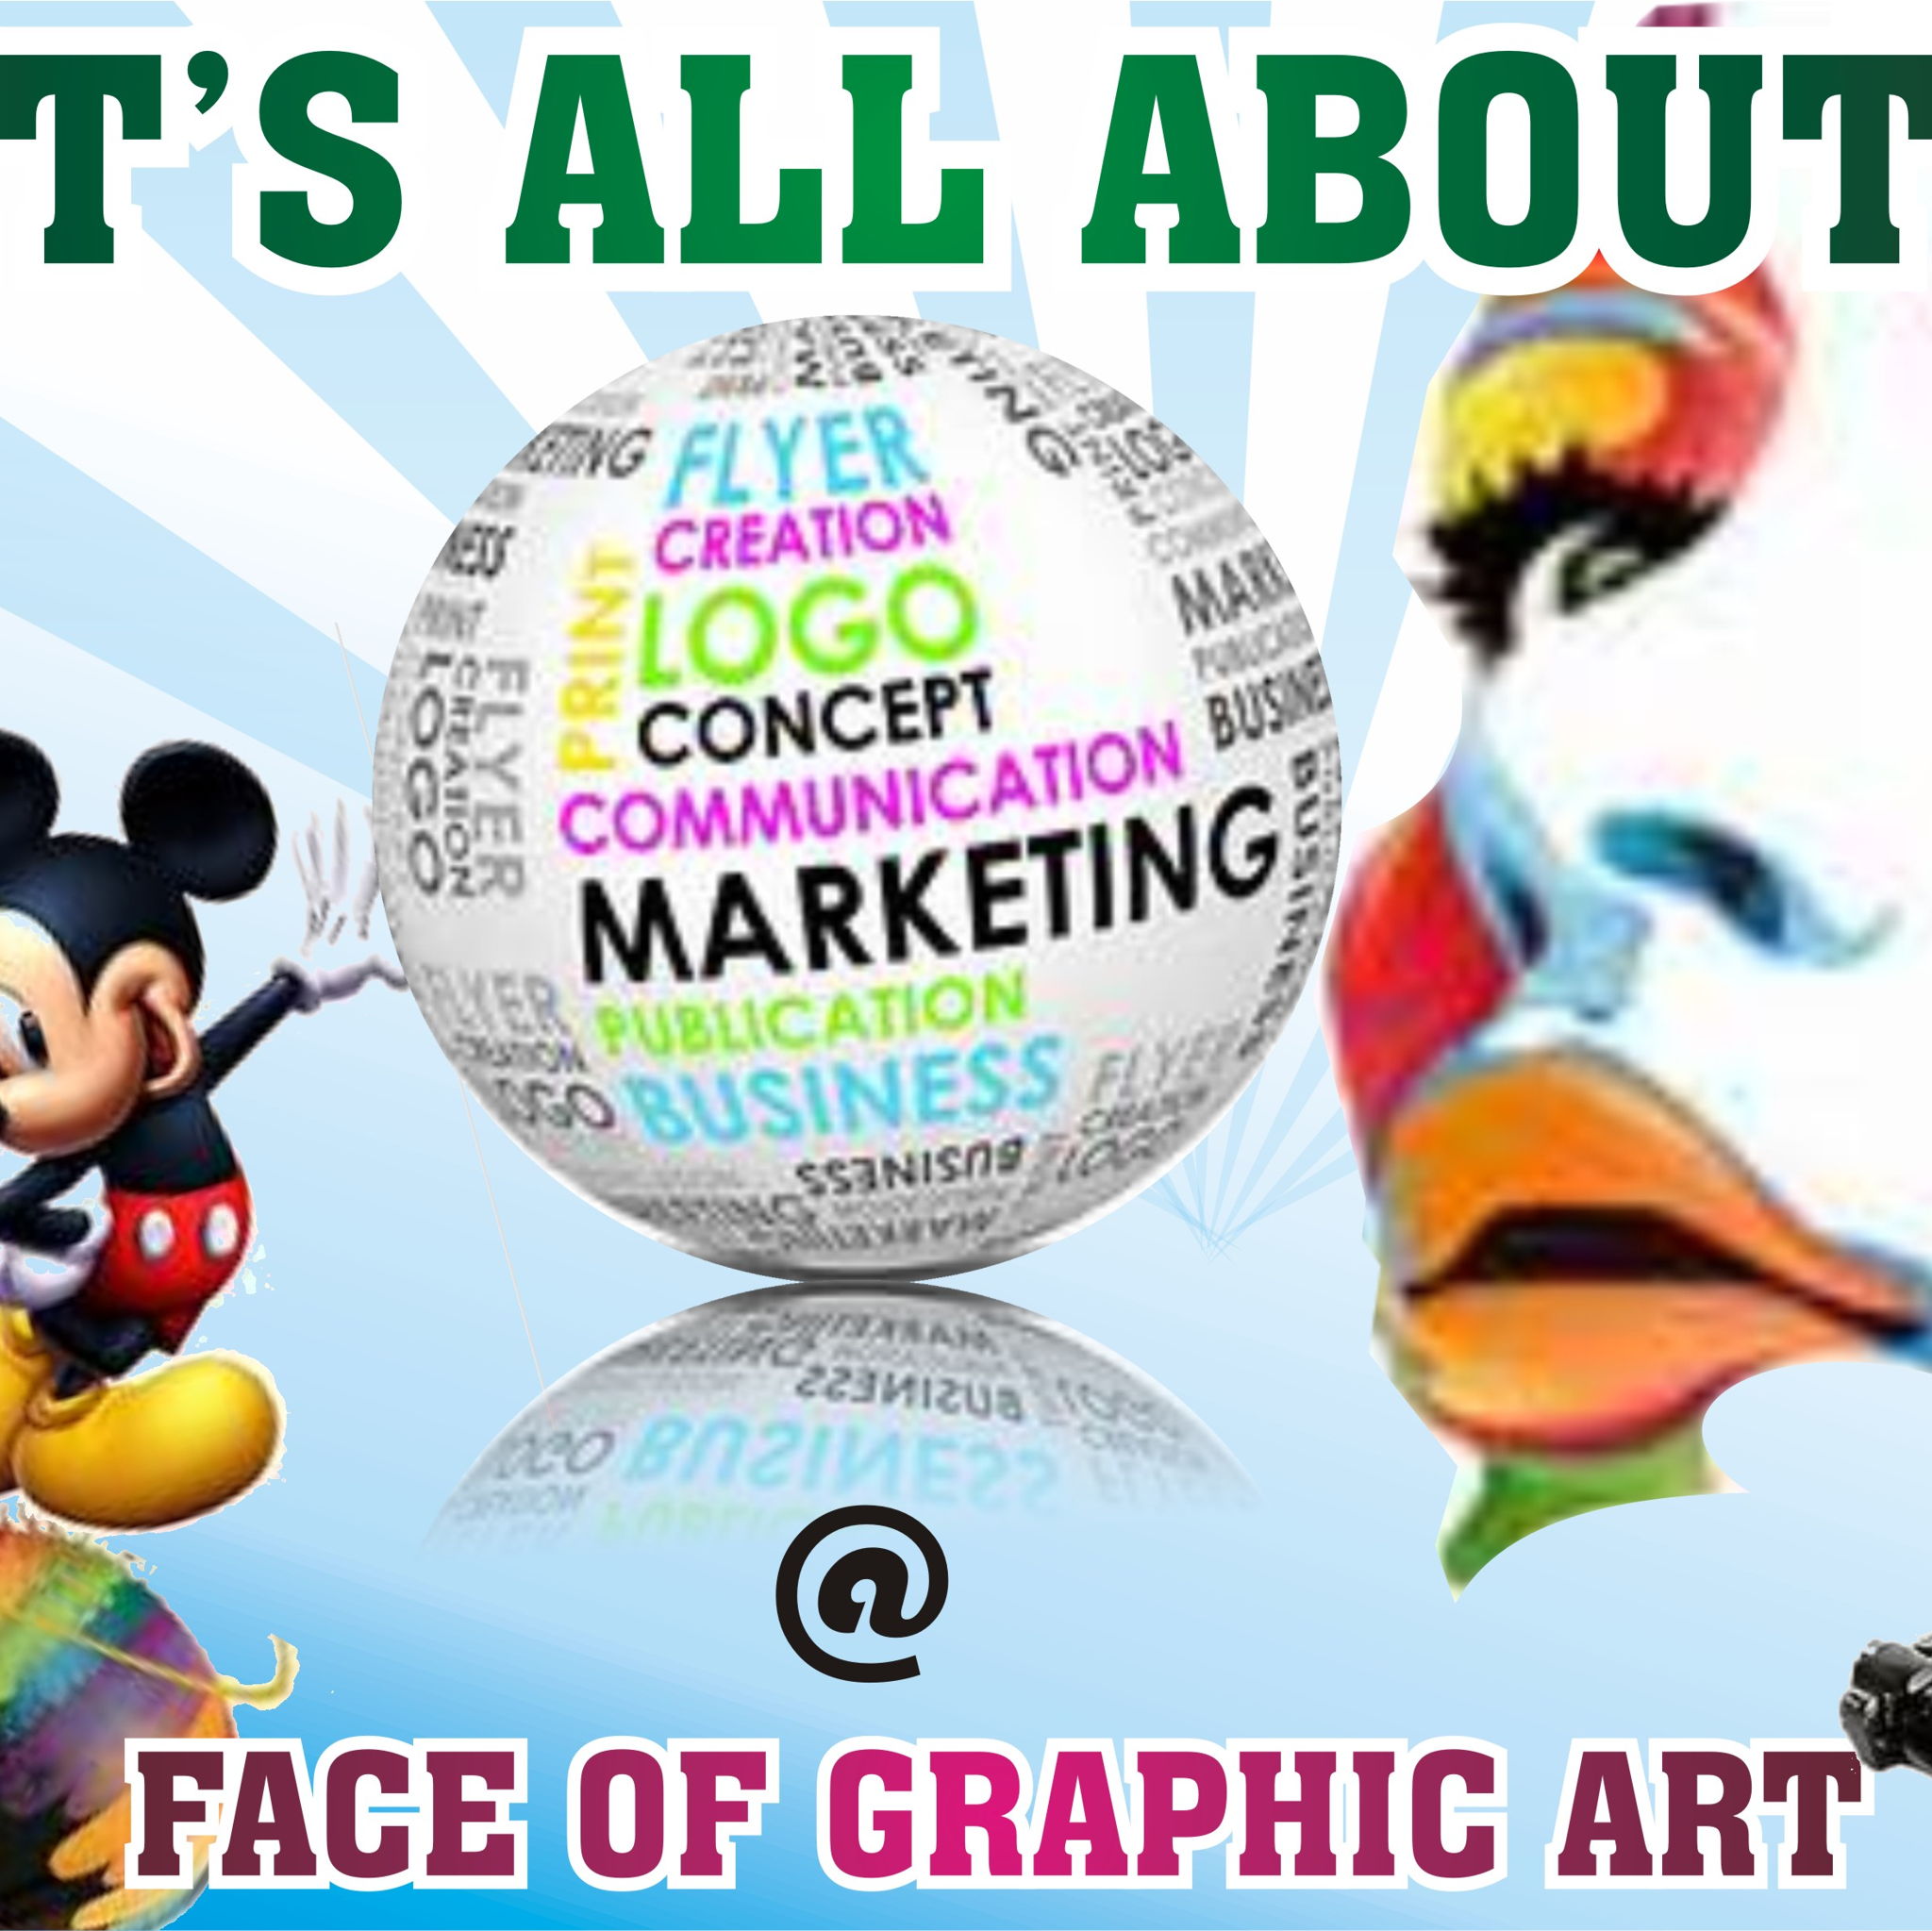 Face of Graphic Art